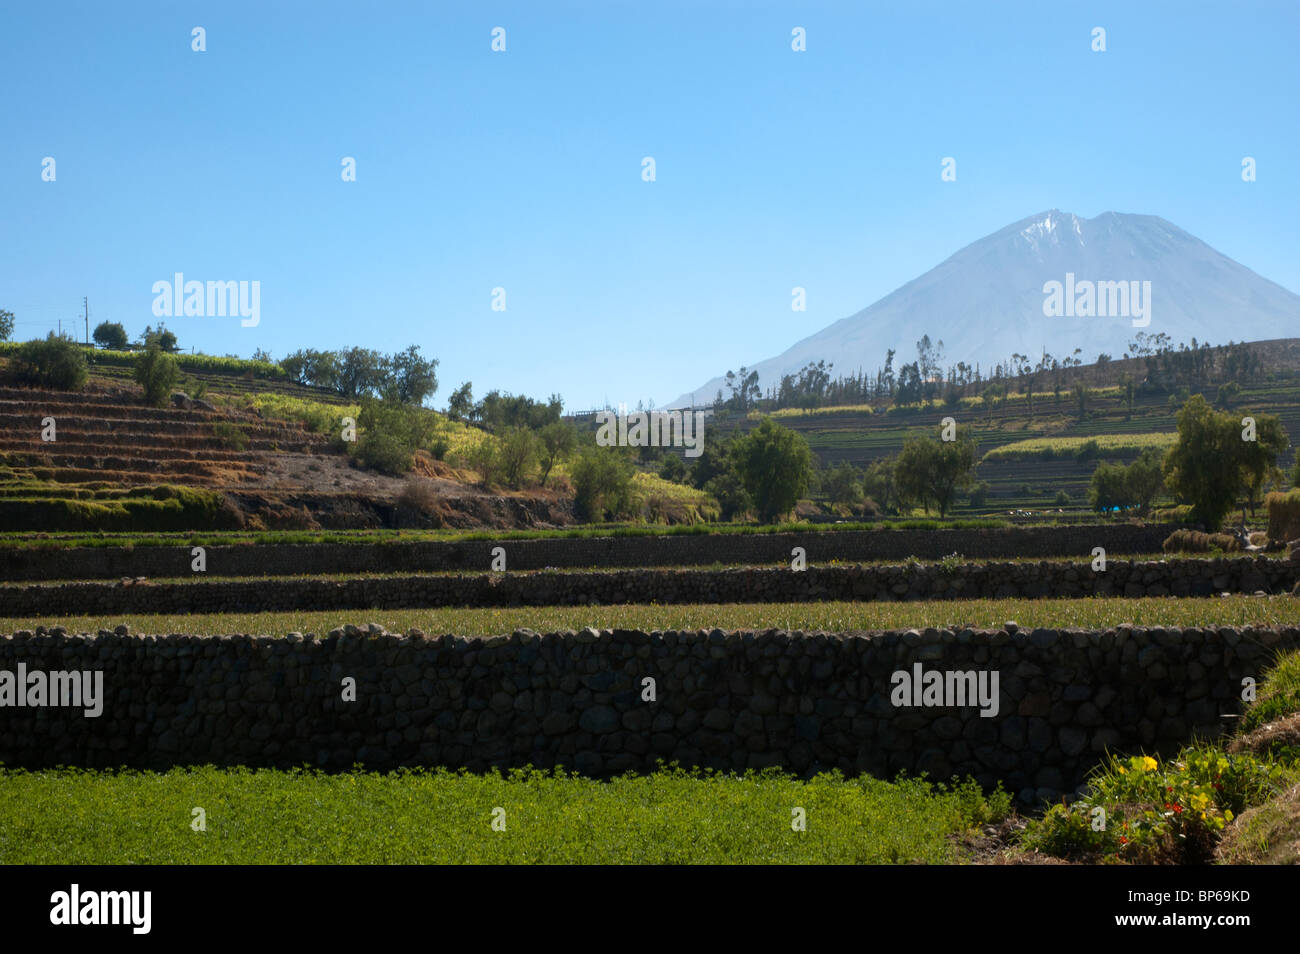 El Misti, volcano, in the distance, with ancient rock wall terracing, to the suburbs of Arequipa,Peru. Stock Photo